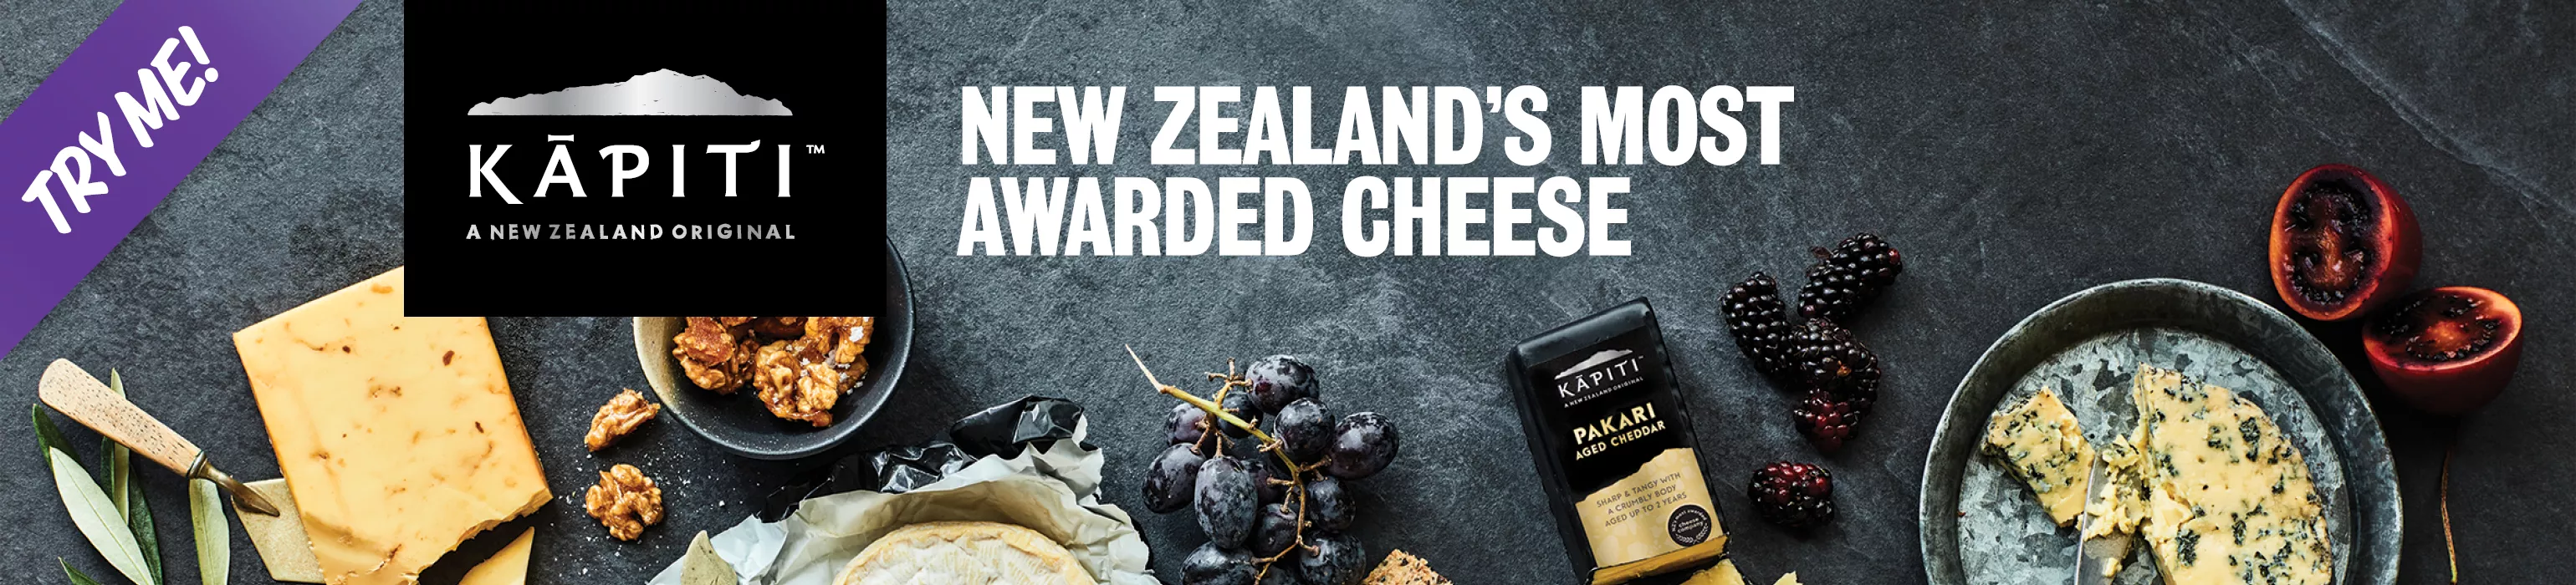 Kapiti Cheese, NZ's most awarded cheese